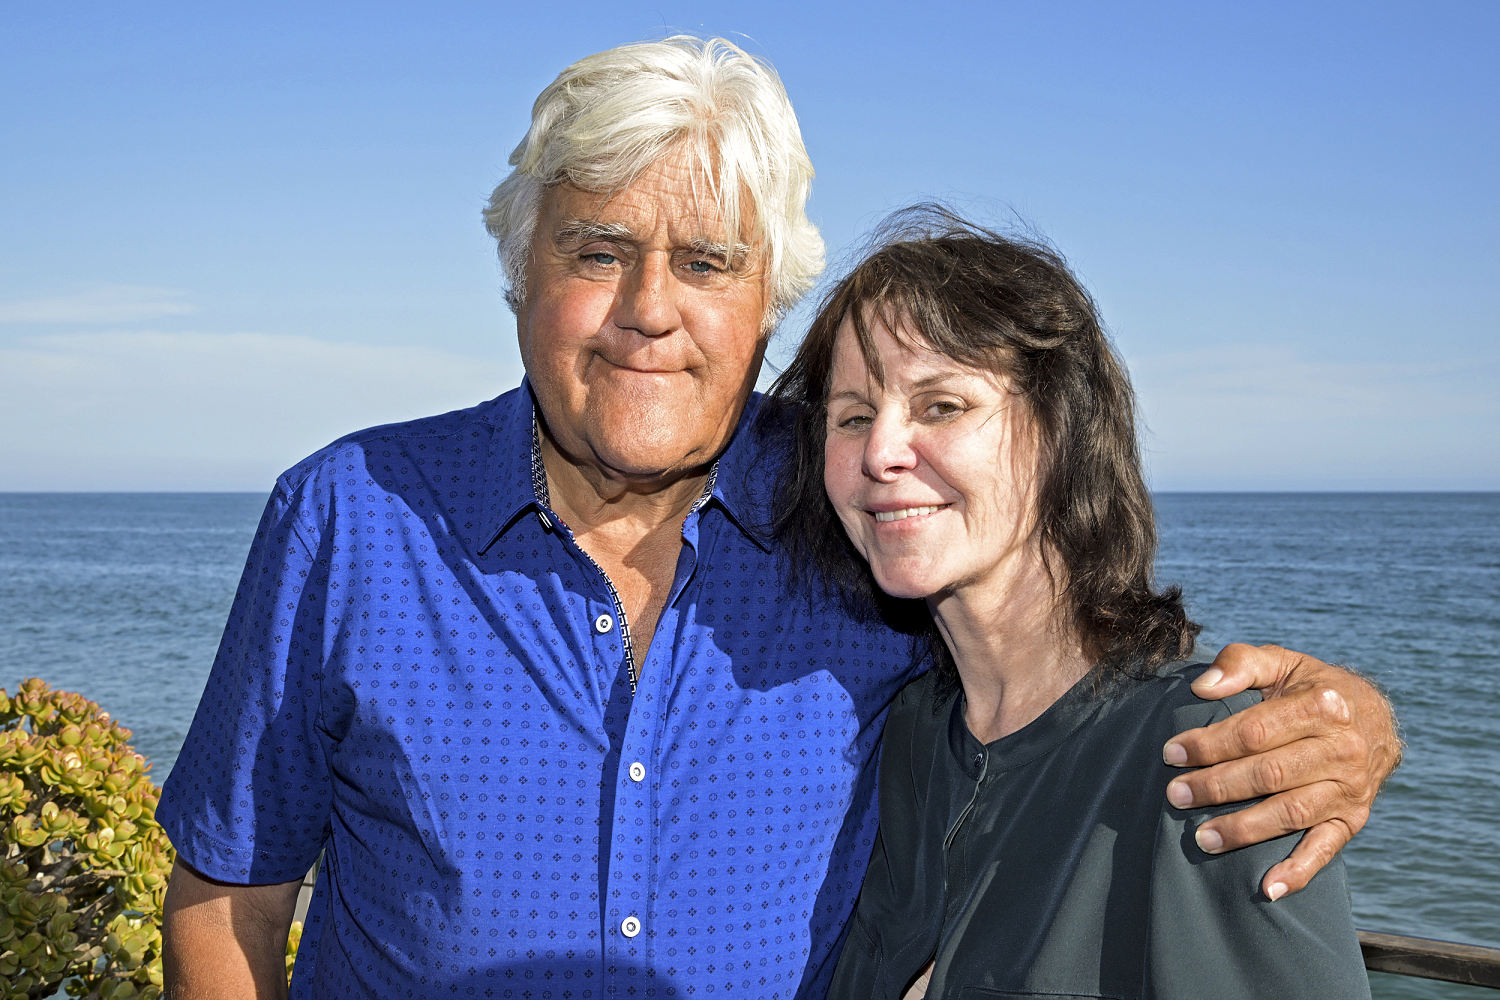 Jay Leno files for conservatorship of his wife’s estate, petition says she has dementia